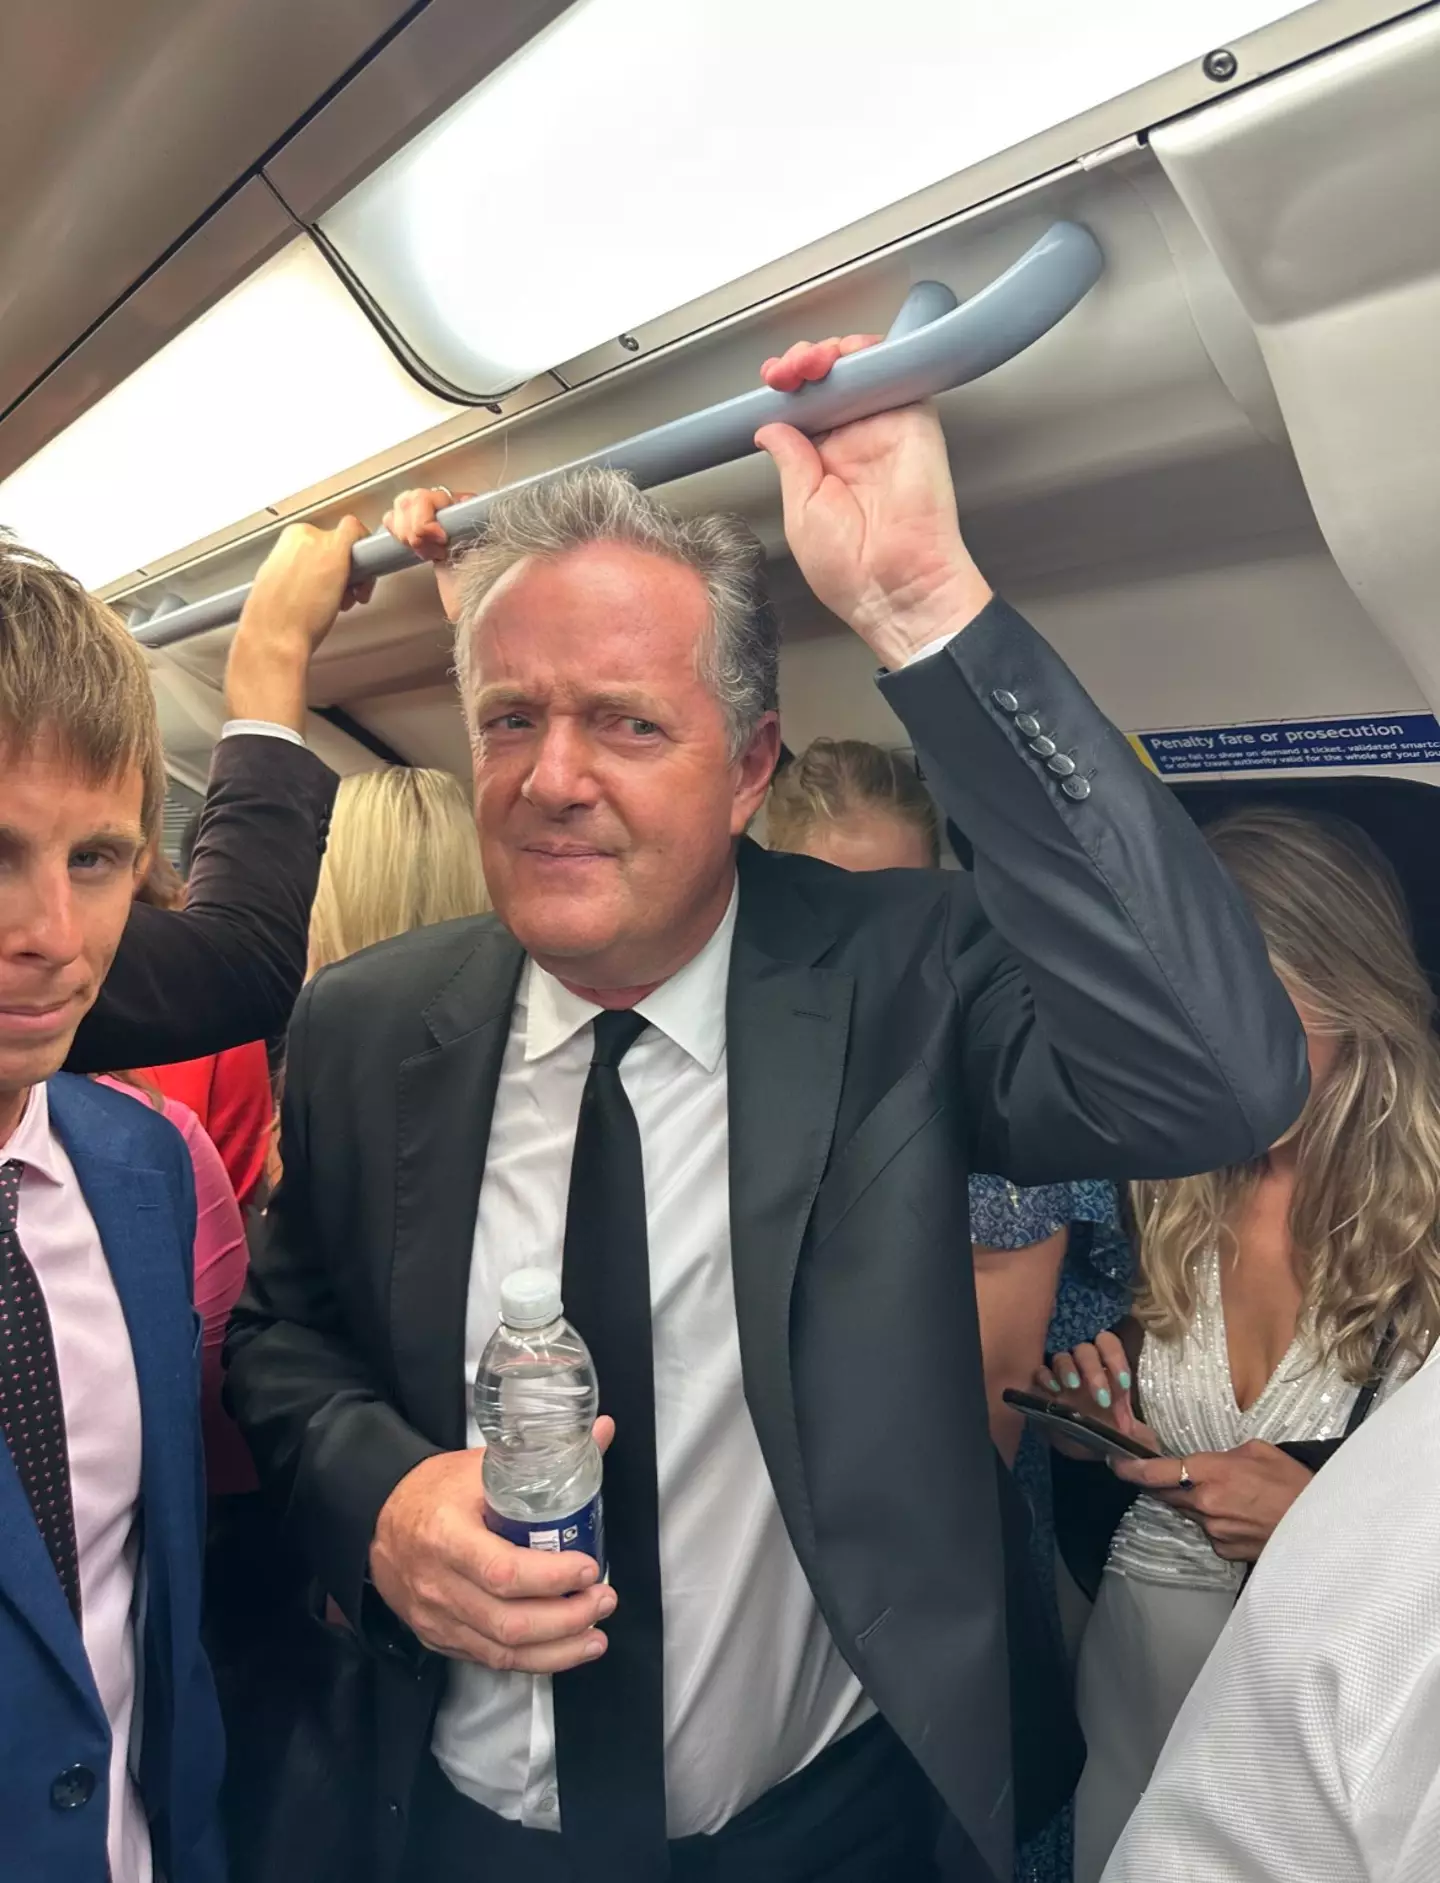 It was the first time Piers had been on the tube in 30+ years